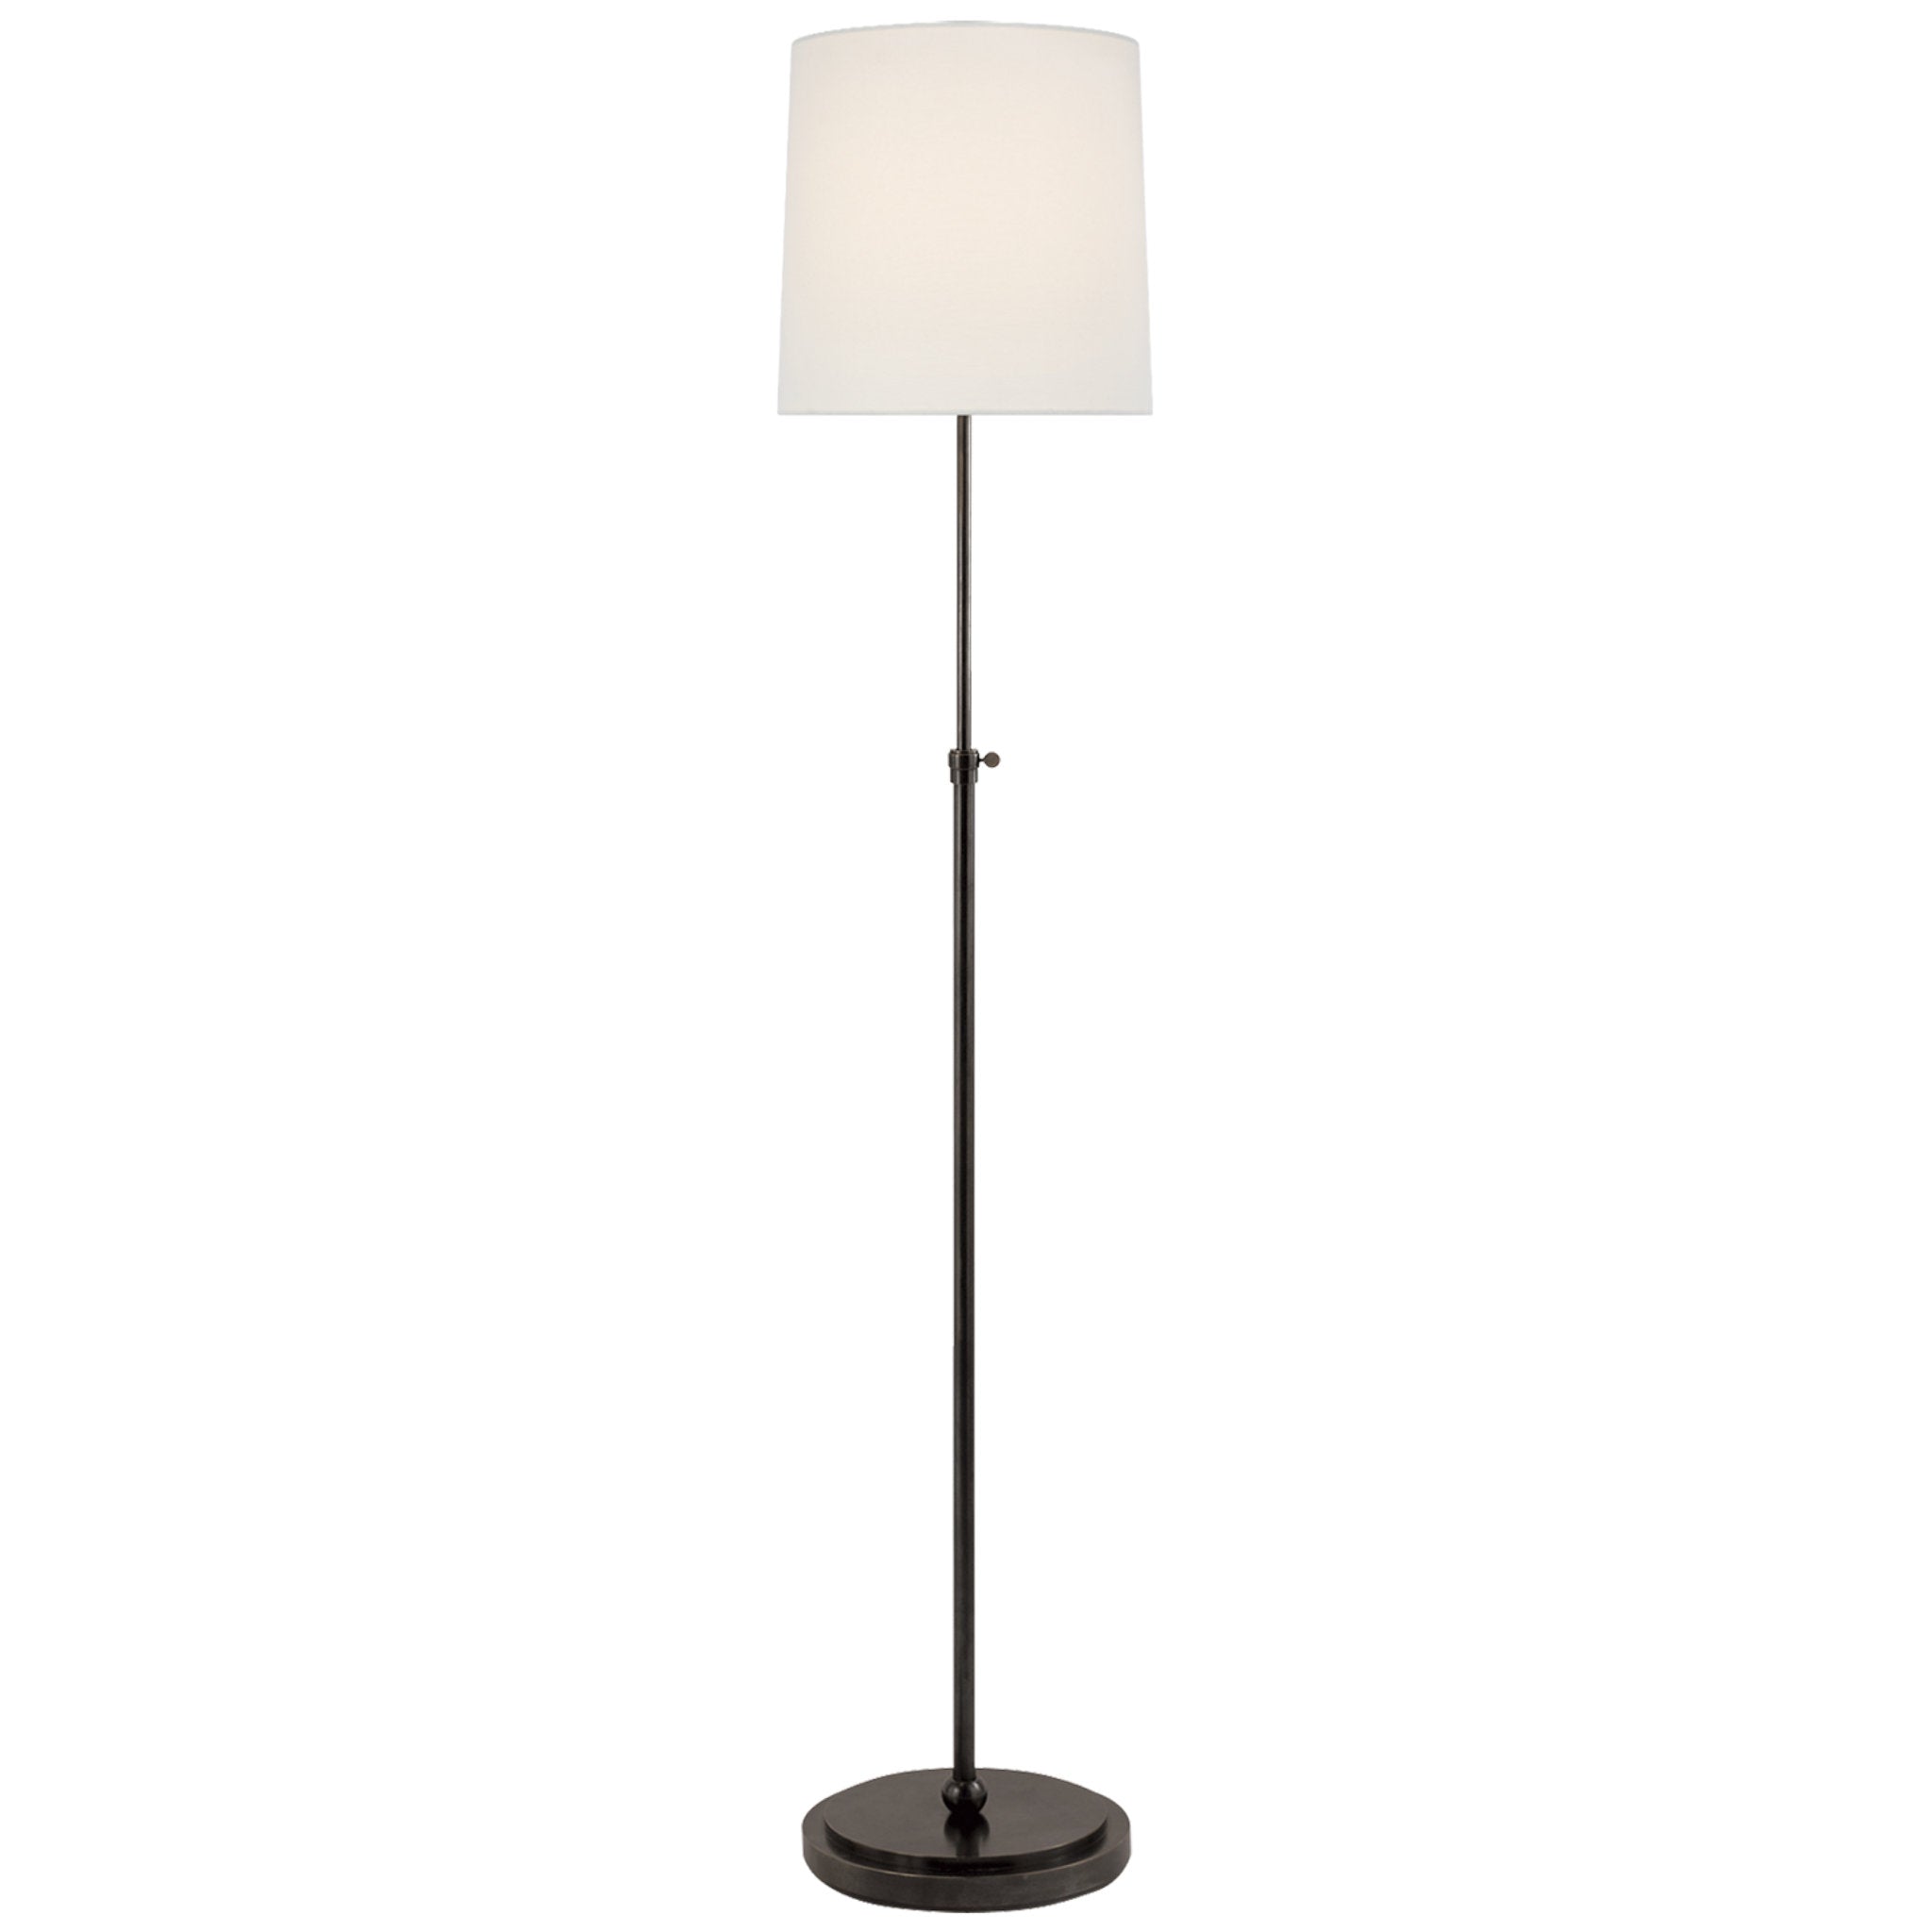 Thomas O'Brien Bryant Floor Lamp in Bronze with Linen Shade